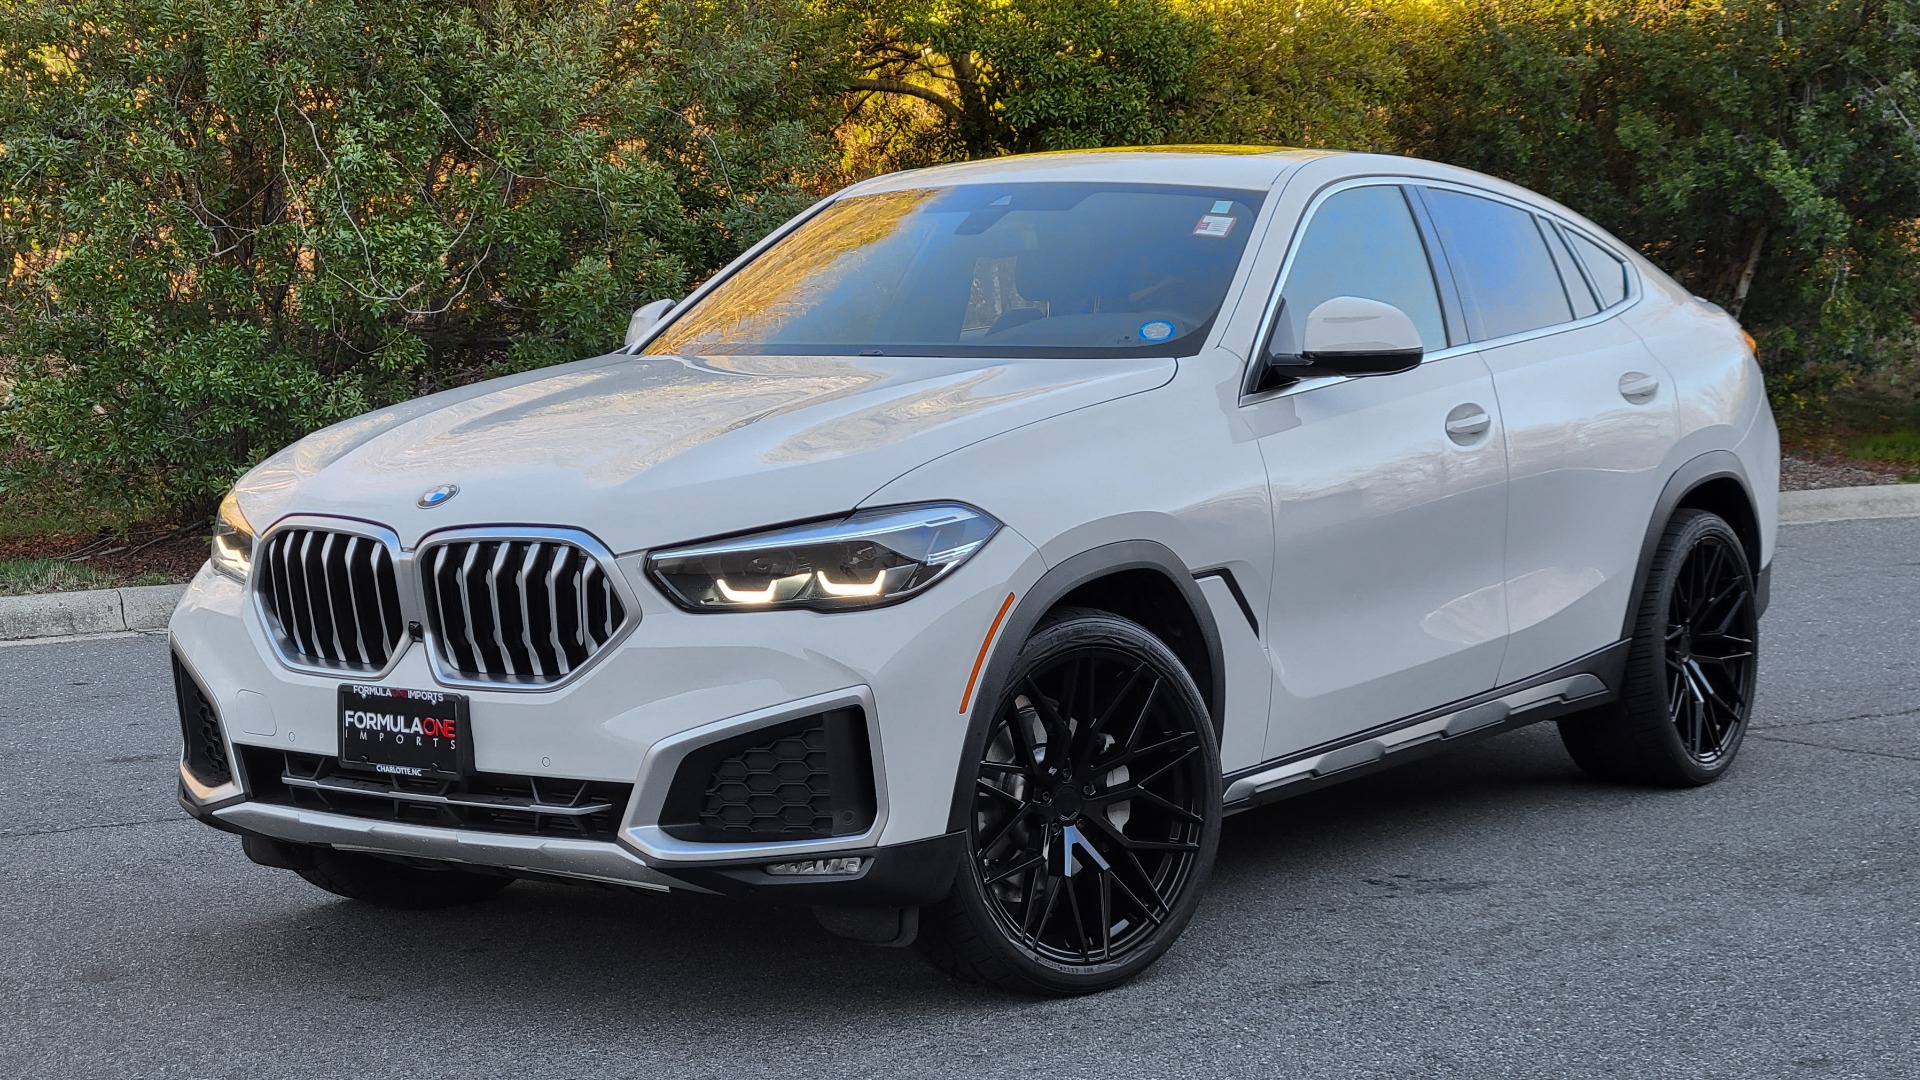 Used 2021 BMW X6 XDRIVE40I PREMIUM / HUD / NAV / H/K SND / SUNROOF / REARVIEW for sale $72,995 at Formula Imports in Charlotte NC 28227 1